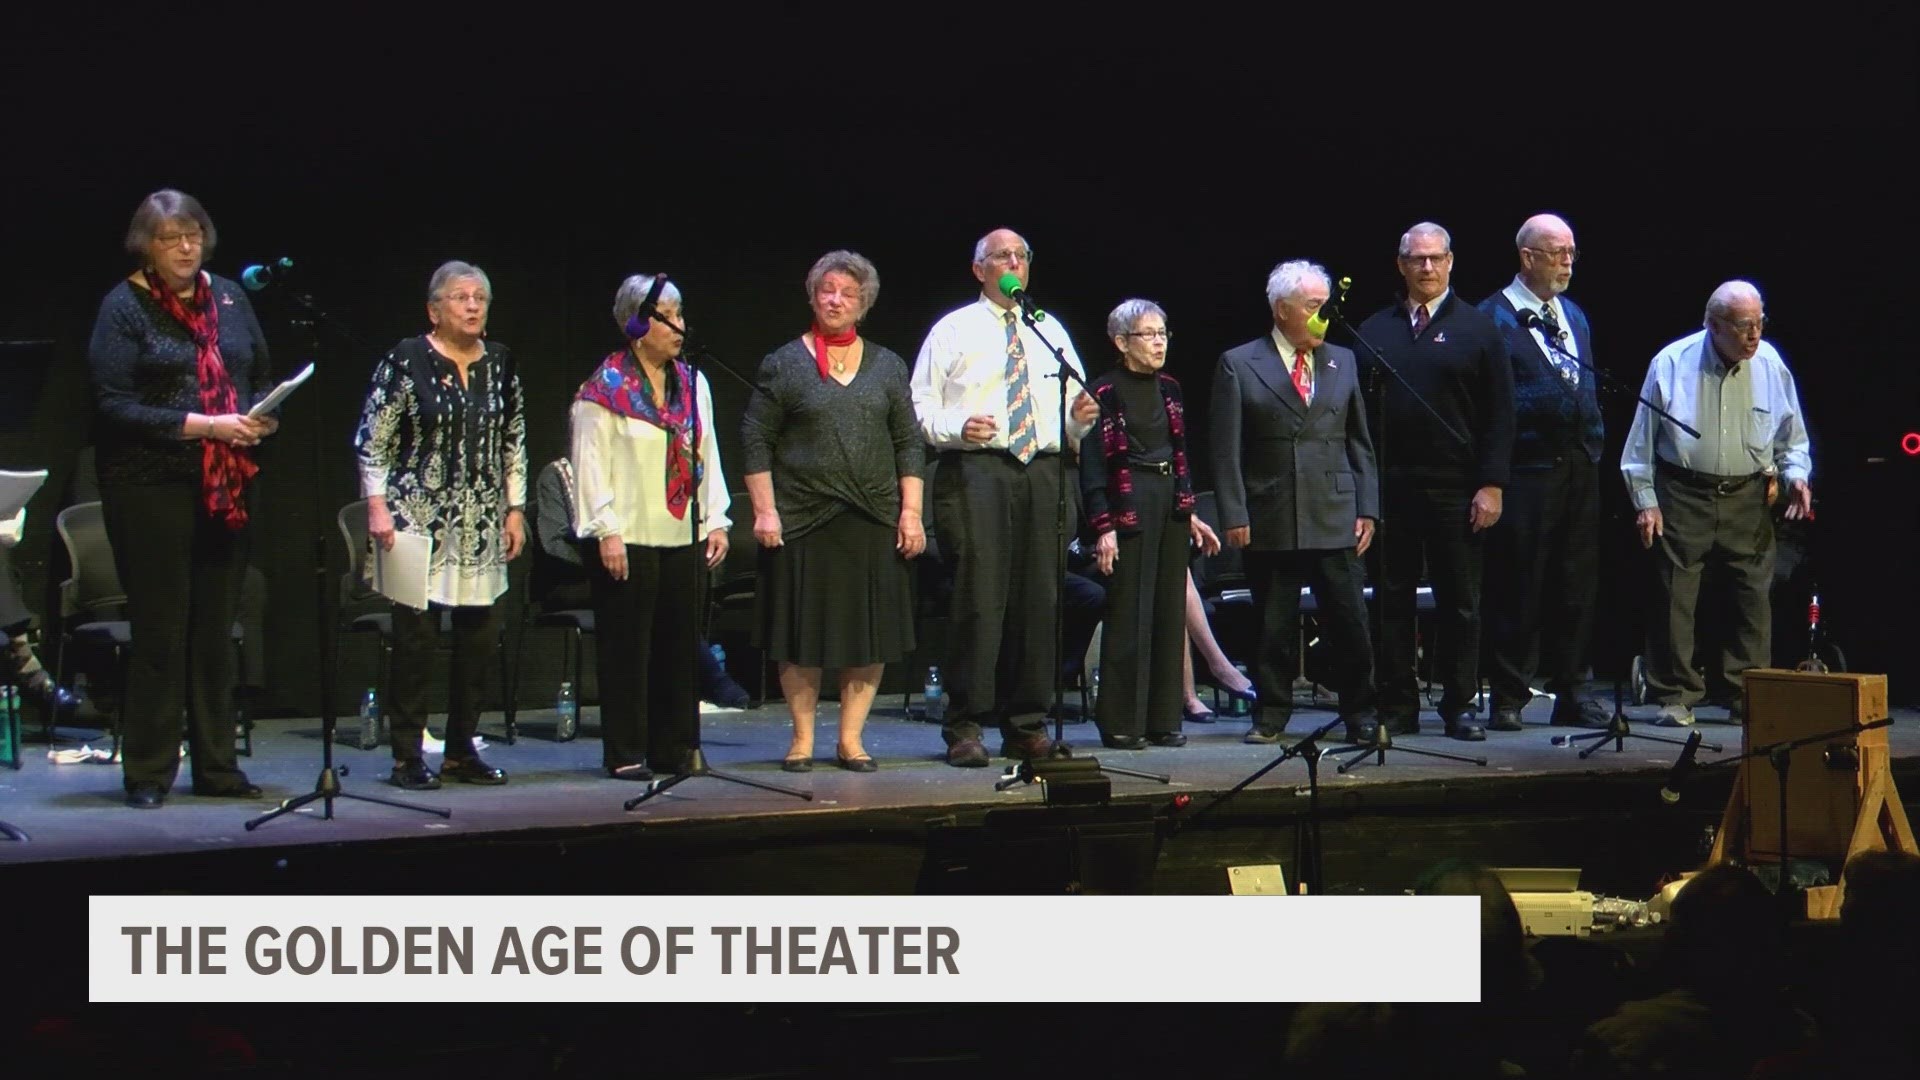 Members of the ensemble performed classic radio shows at the Des Moines Playhouse